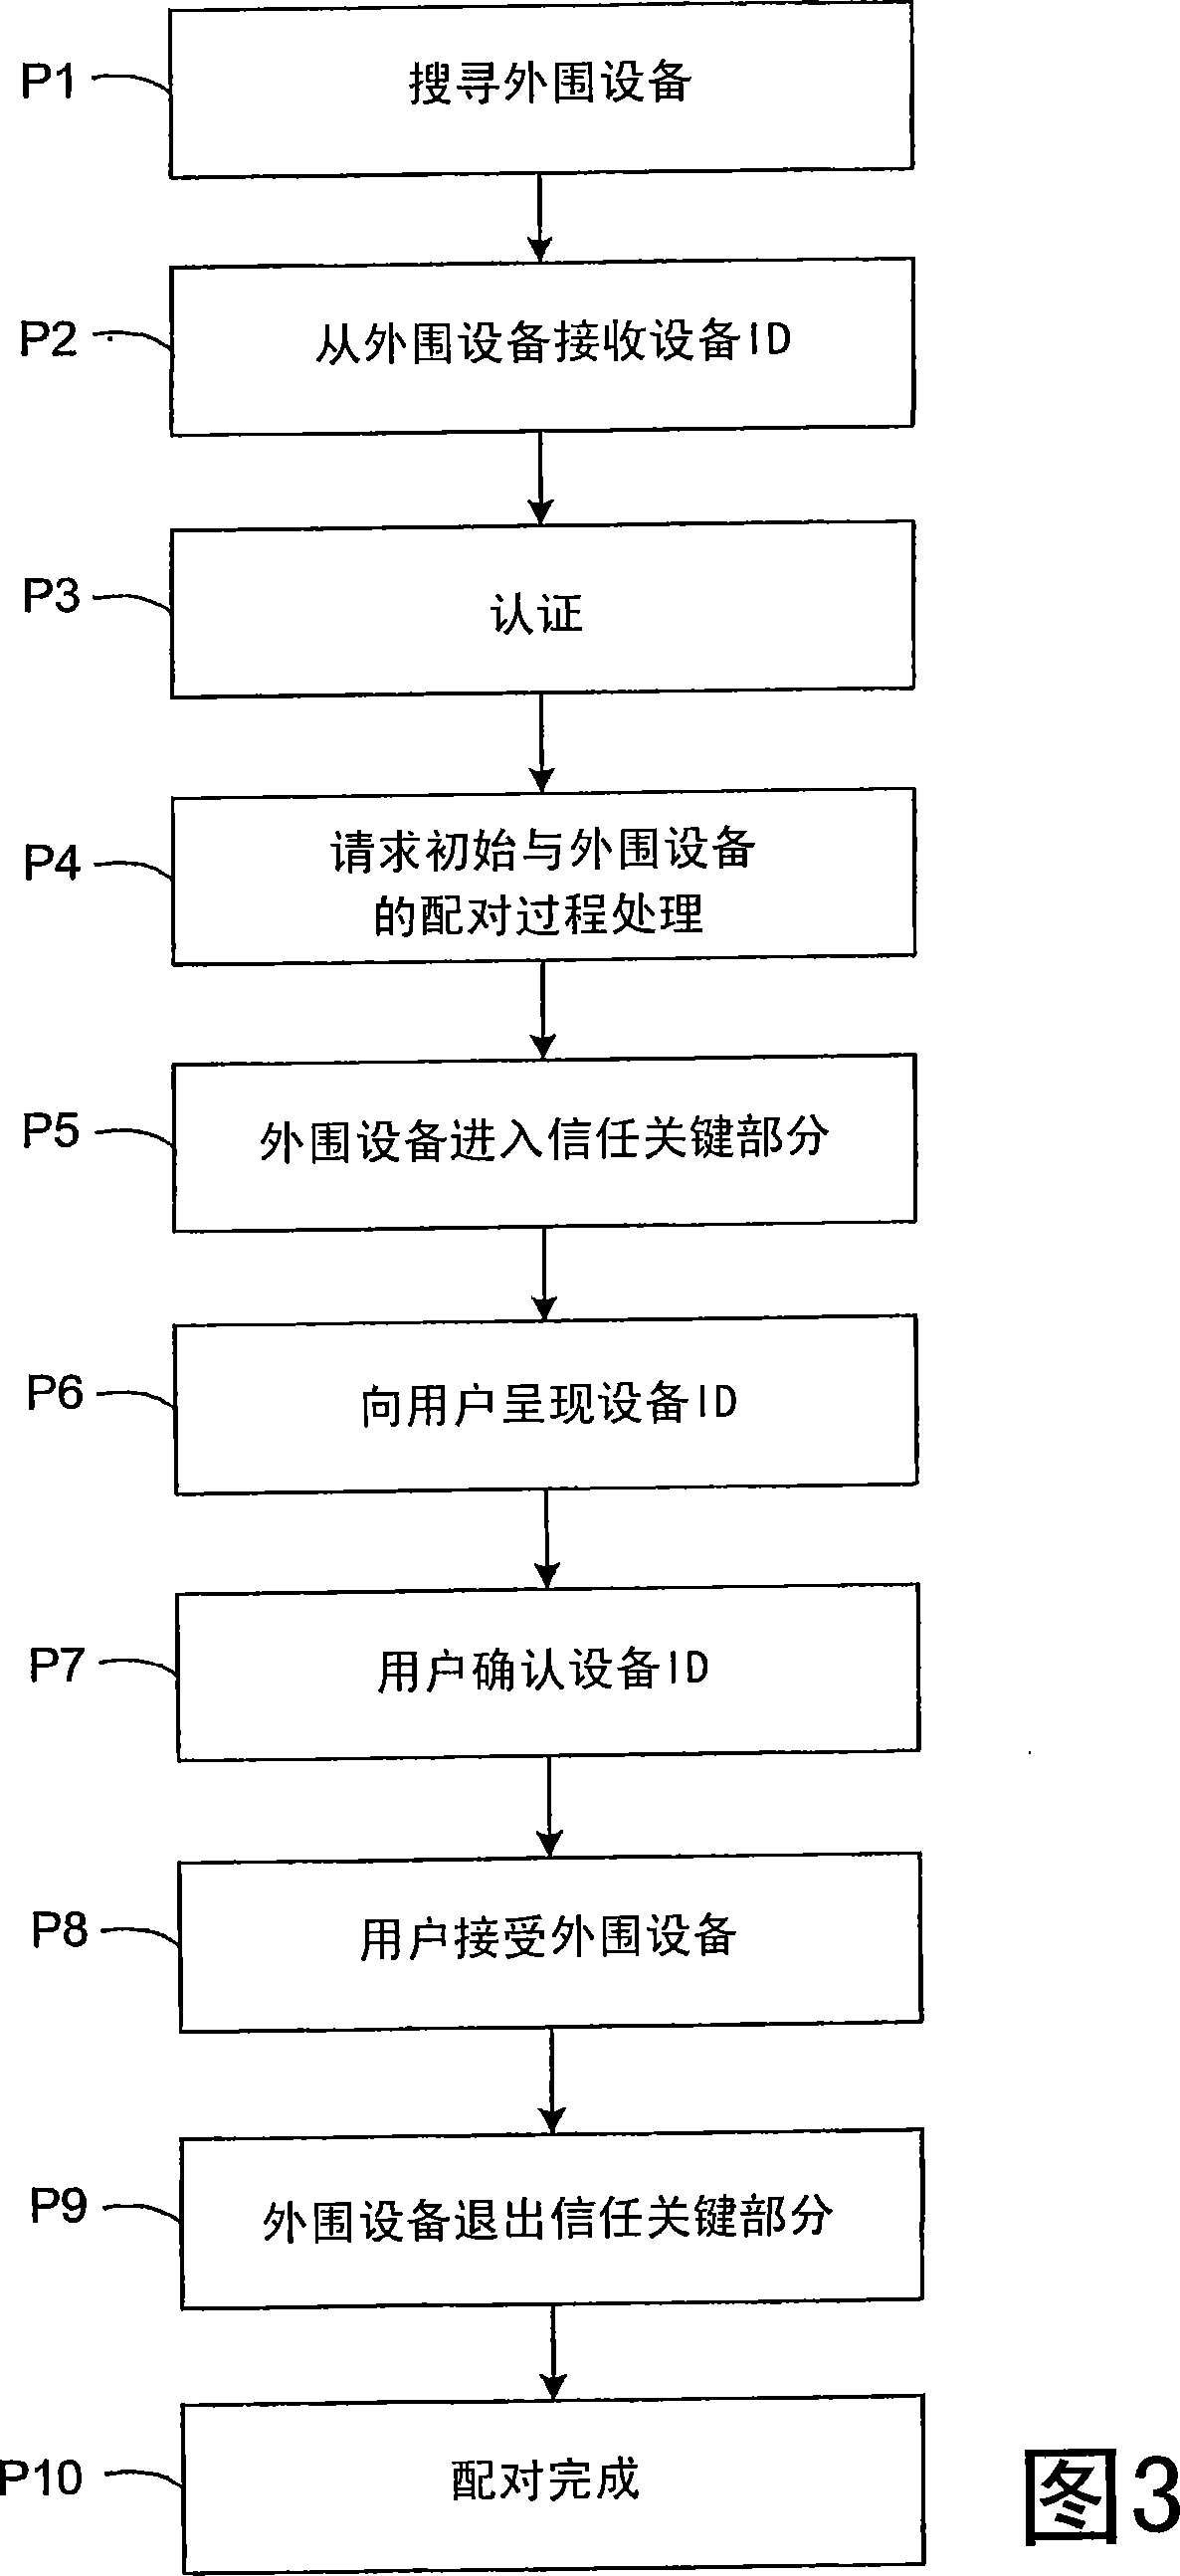 Secure pairing for wired or wireless communications devices